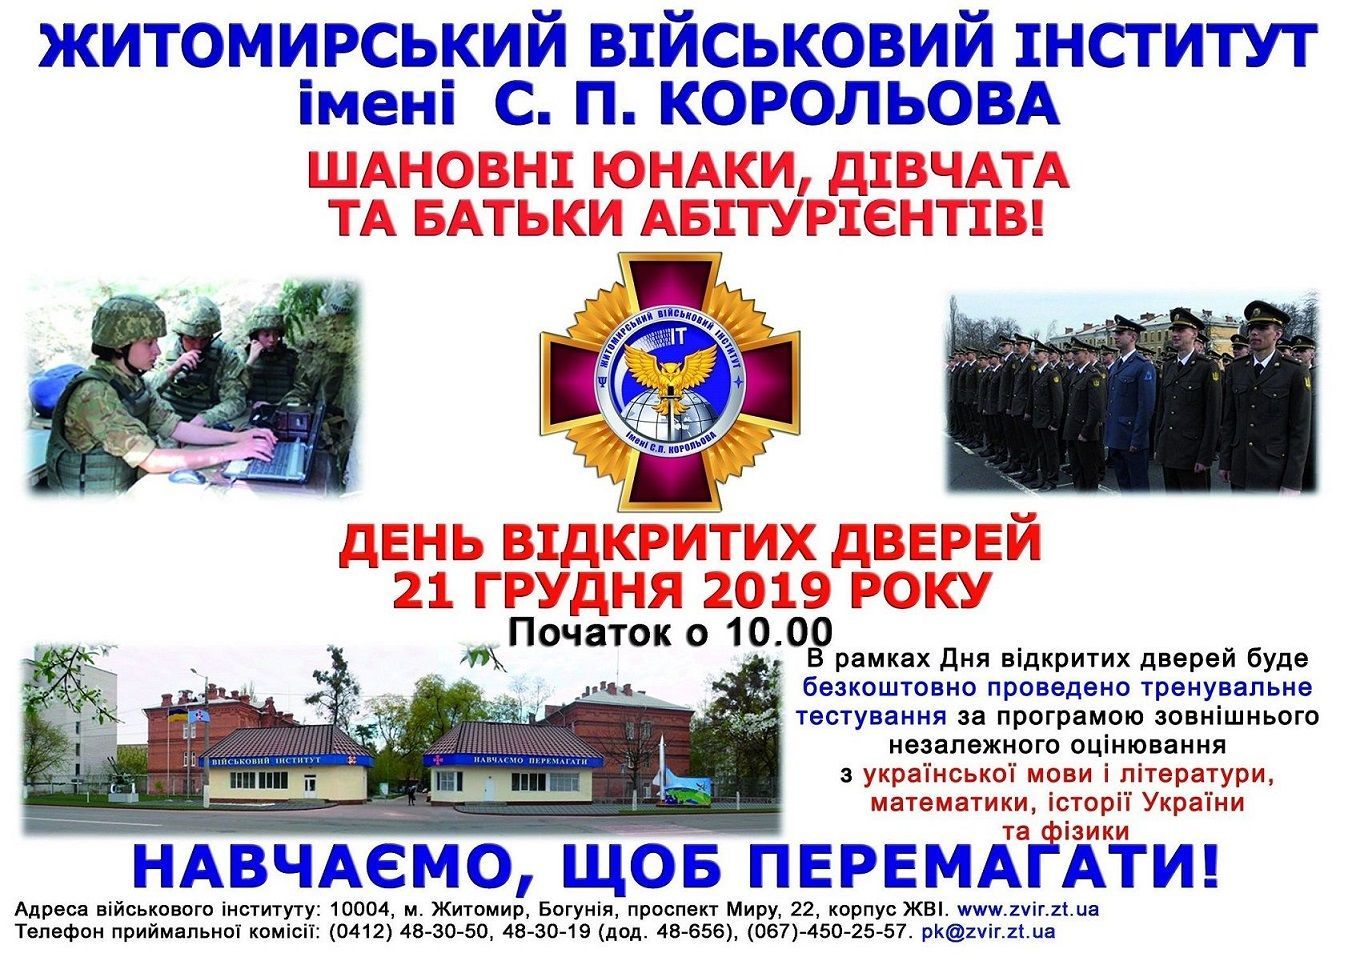 Zhytomyr Military Institute Named after Serhii Koroliov Invites to Open Door Day